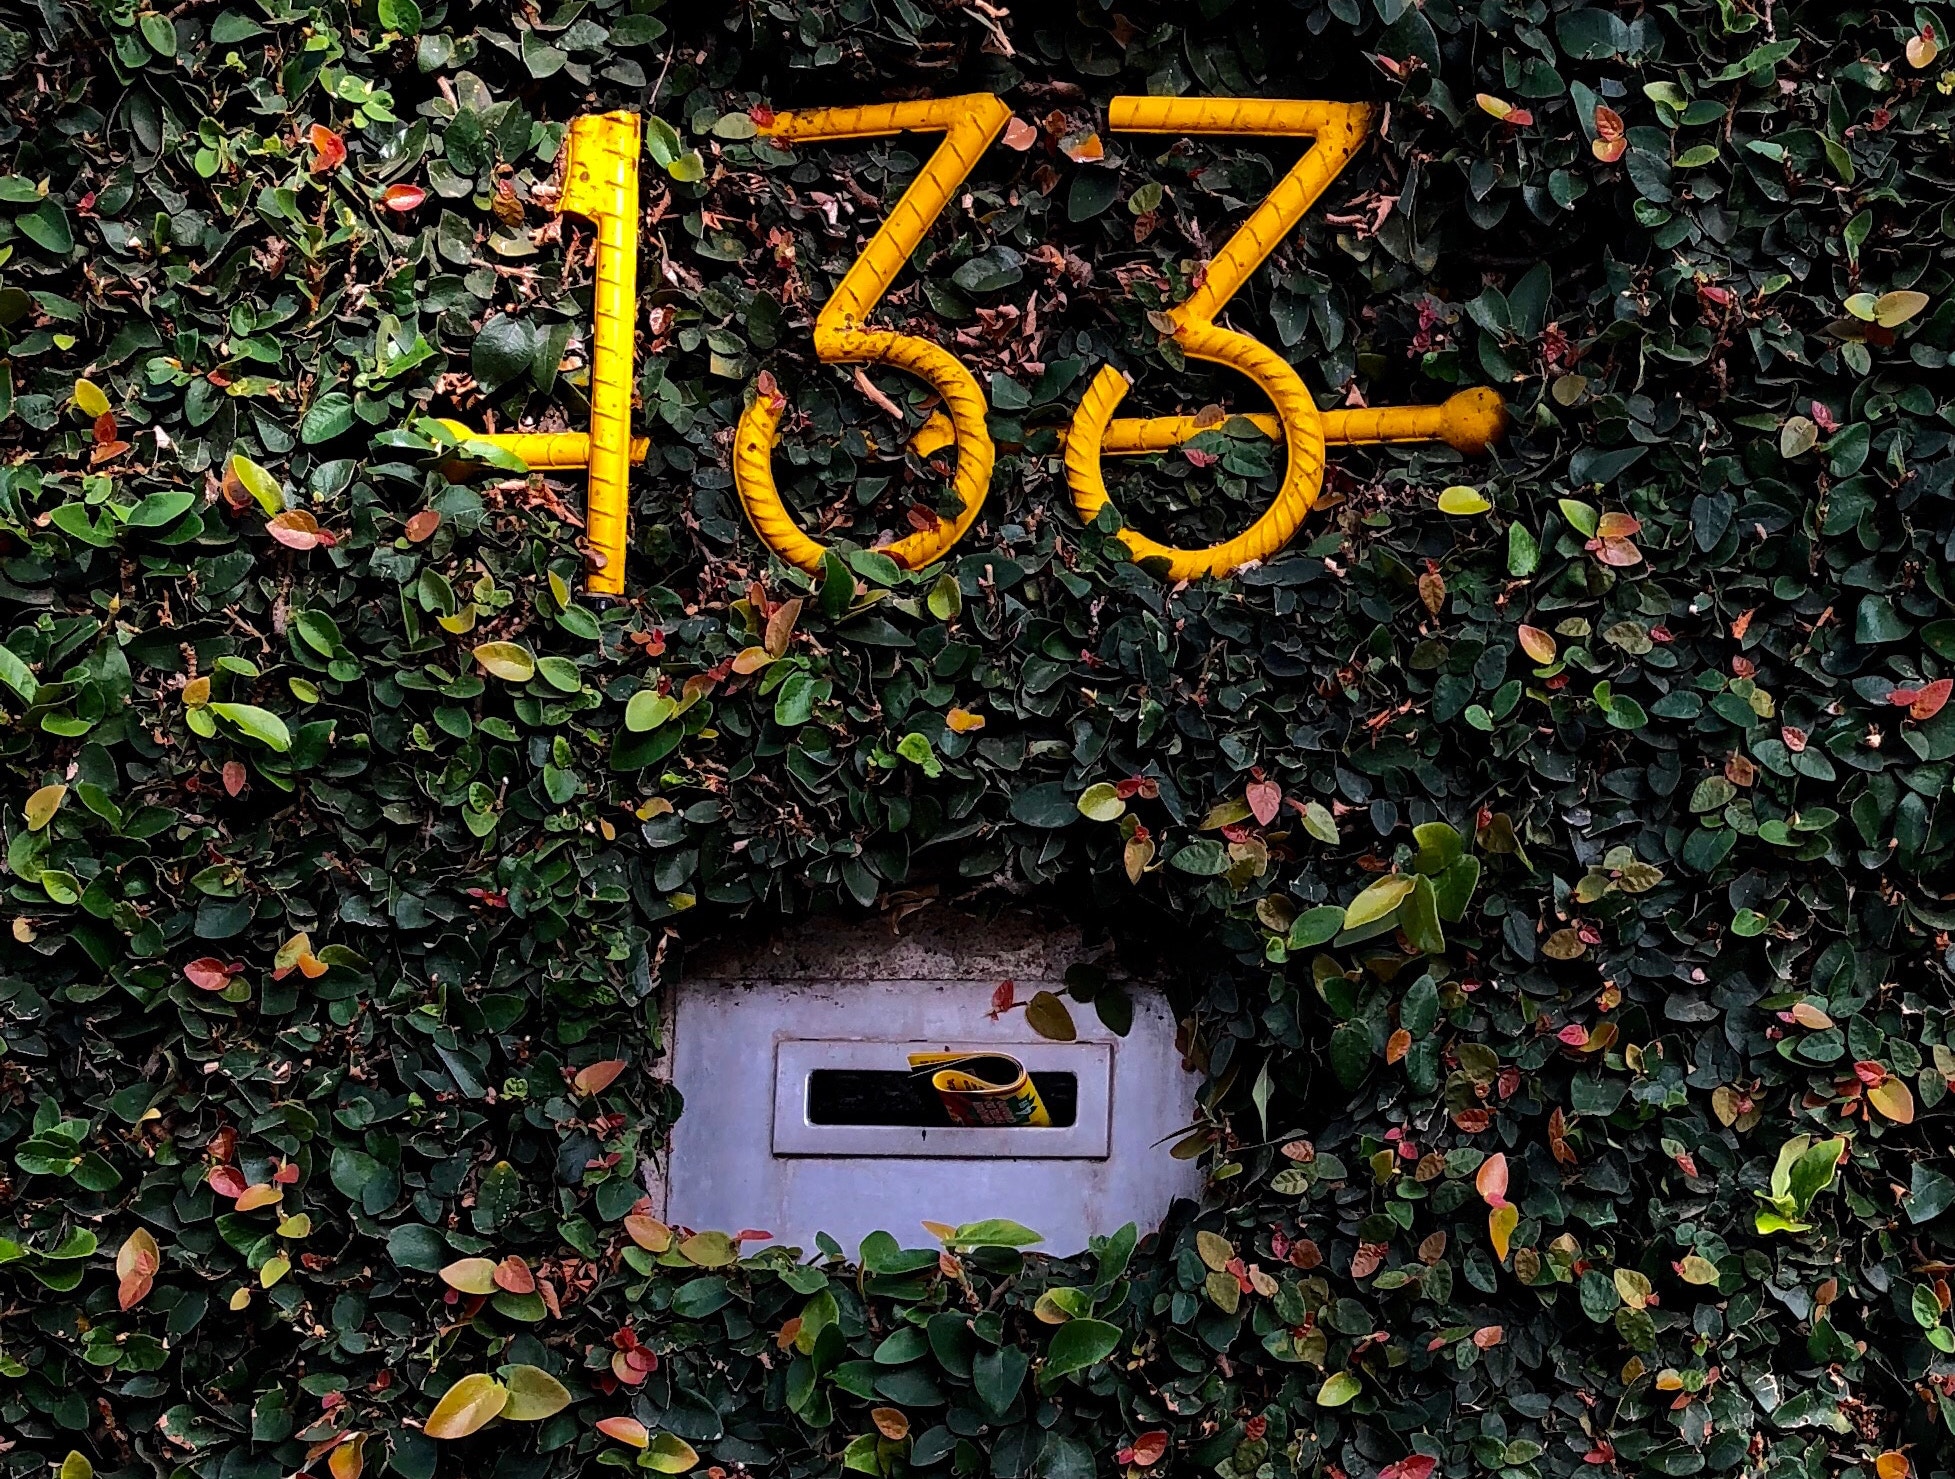 Wall covered in plant with mail slot and address numbers